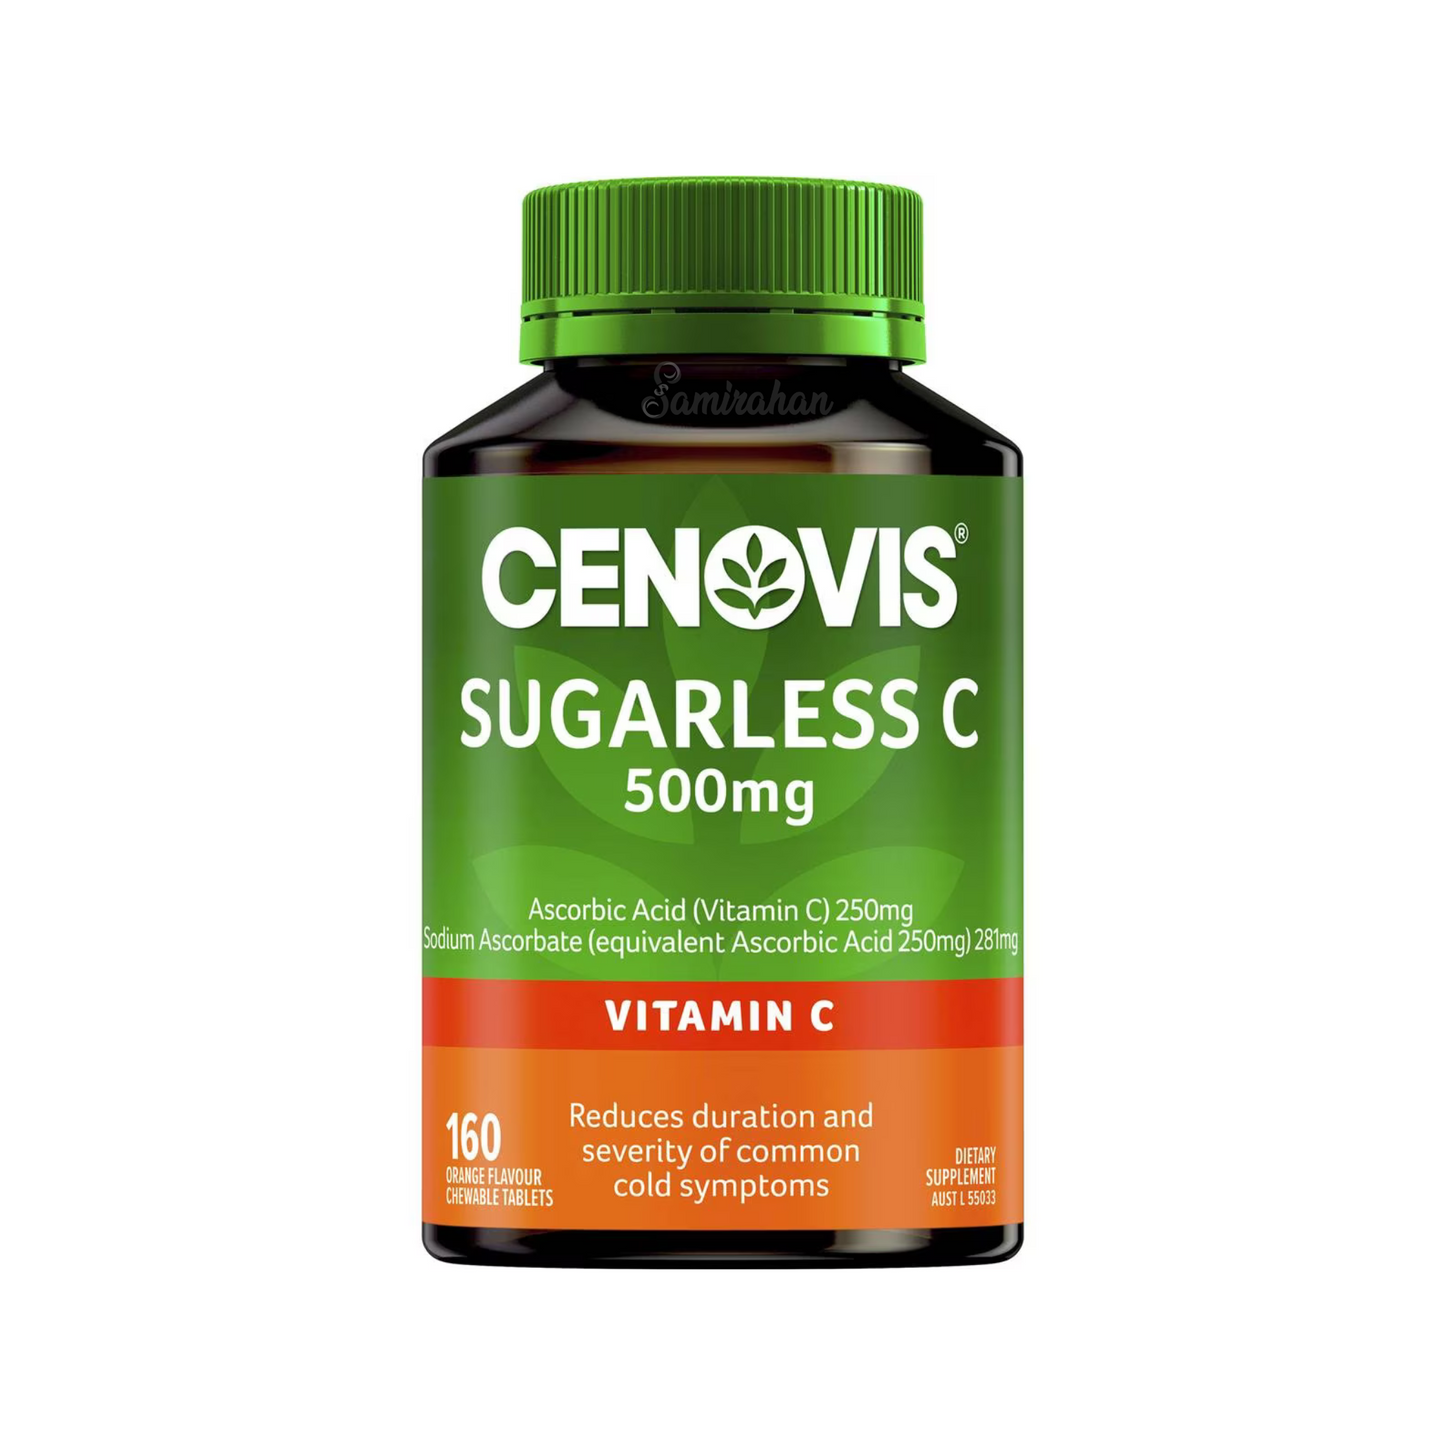 Cenovis Sugarless Vitamin C Chewable 500mg are orange flavoured chewable tablet which ensure regular intake of Vitamin C. Relieves severity of common cold symptoms. Best imported foreign genuine authentic real Australian Aussie premium quality health dietary supplement cheap price in Dhaka Chittagong Sylhet Bangladesh.